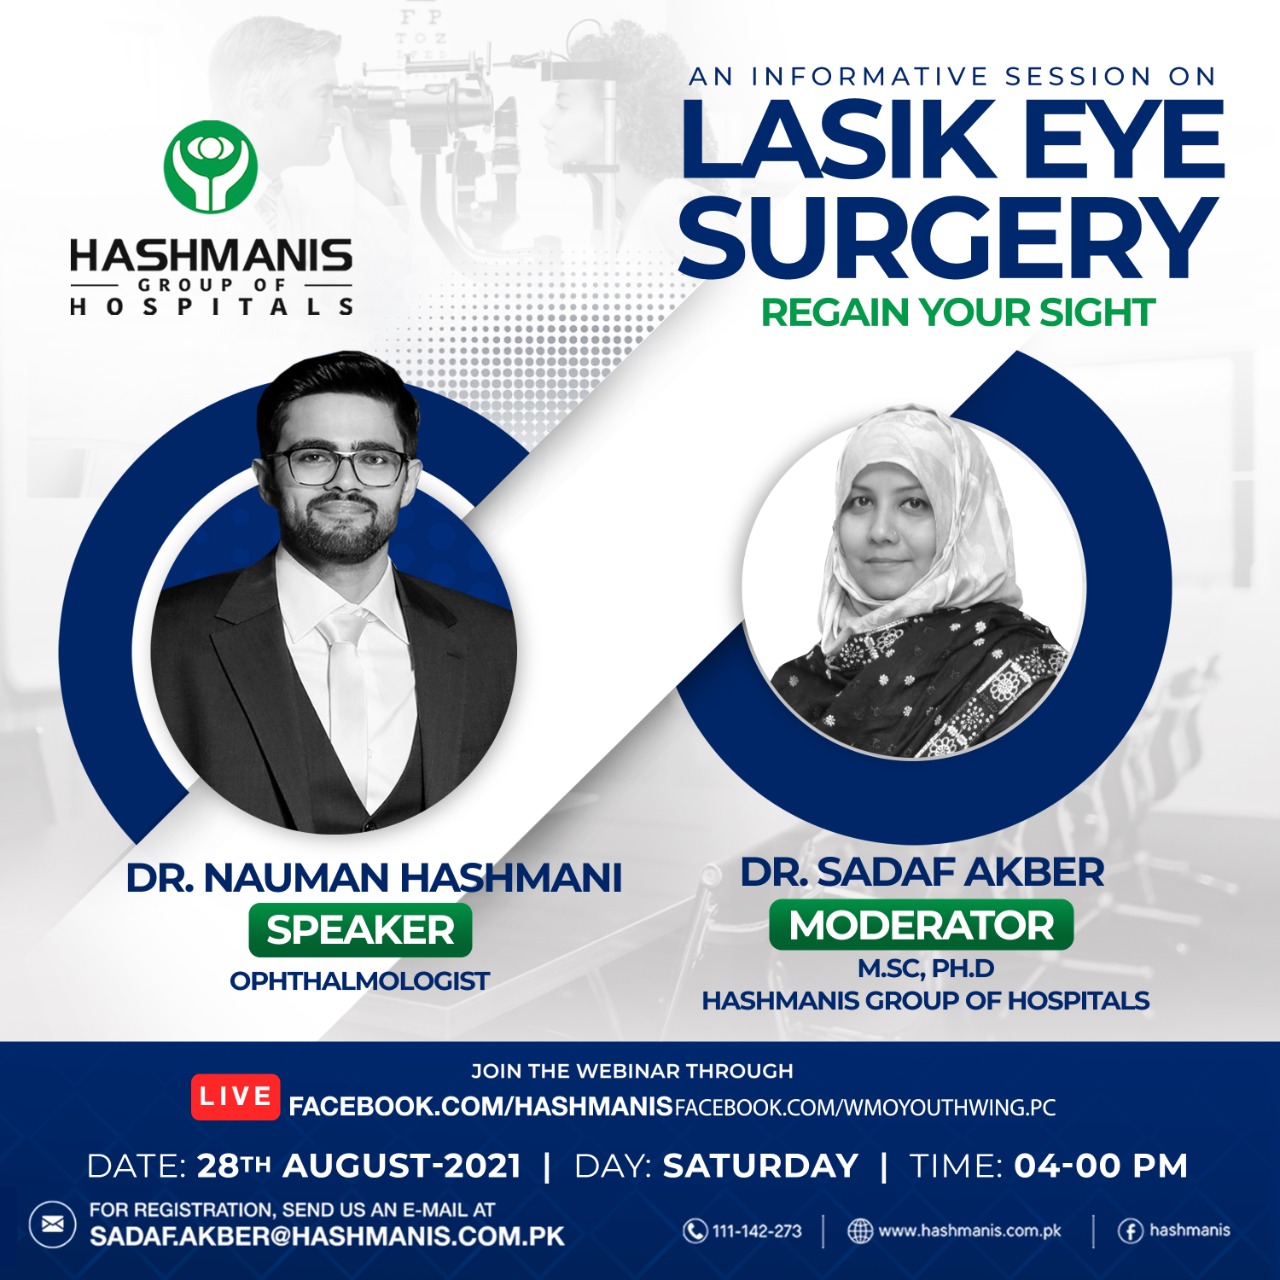 An Informative Session on Lasik Eye Surgery Regain Your Sight